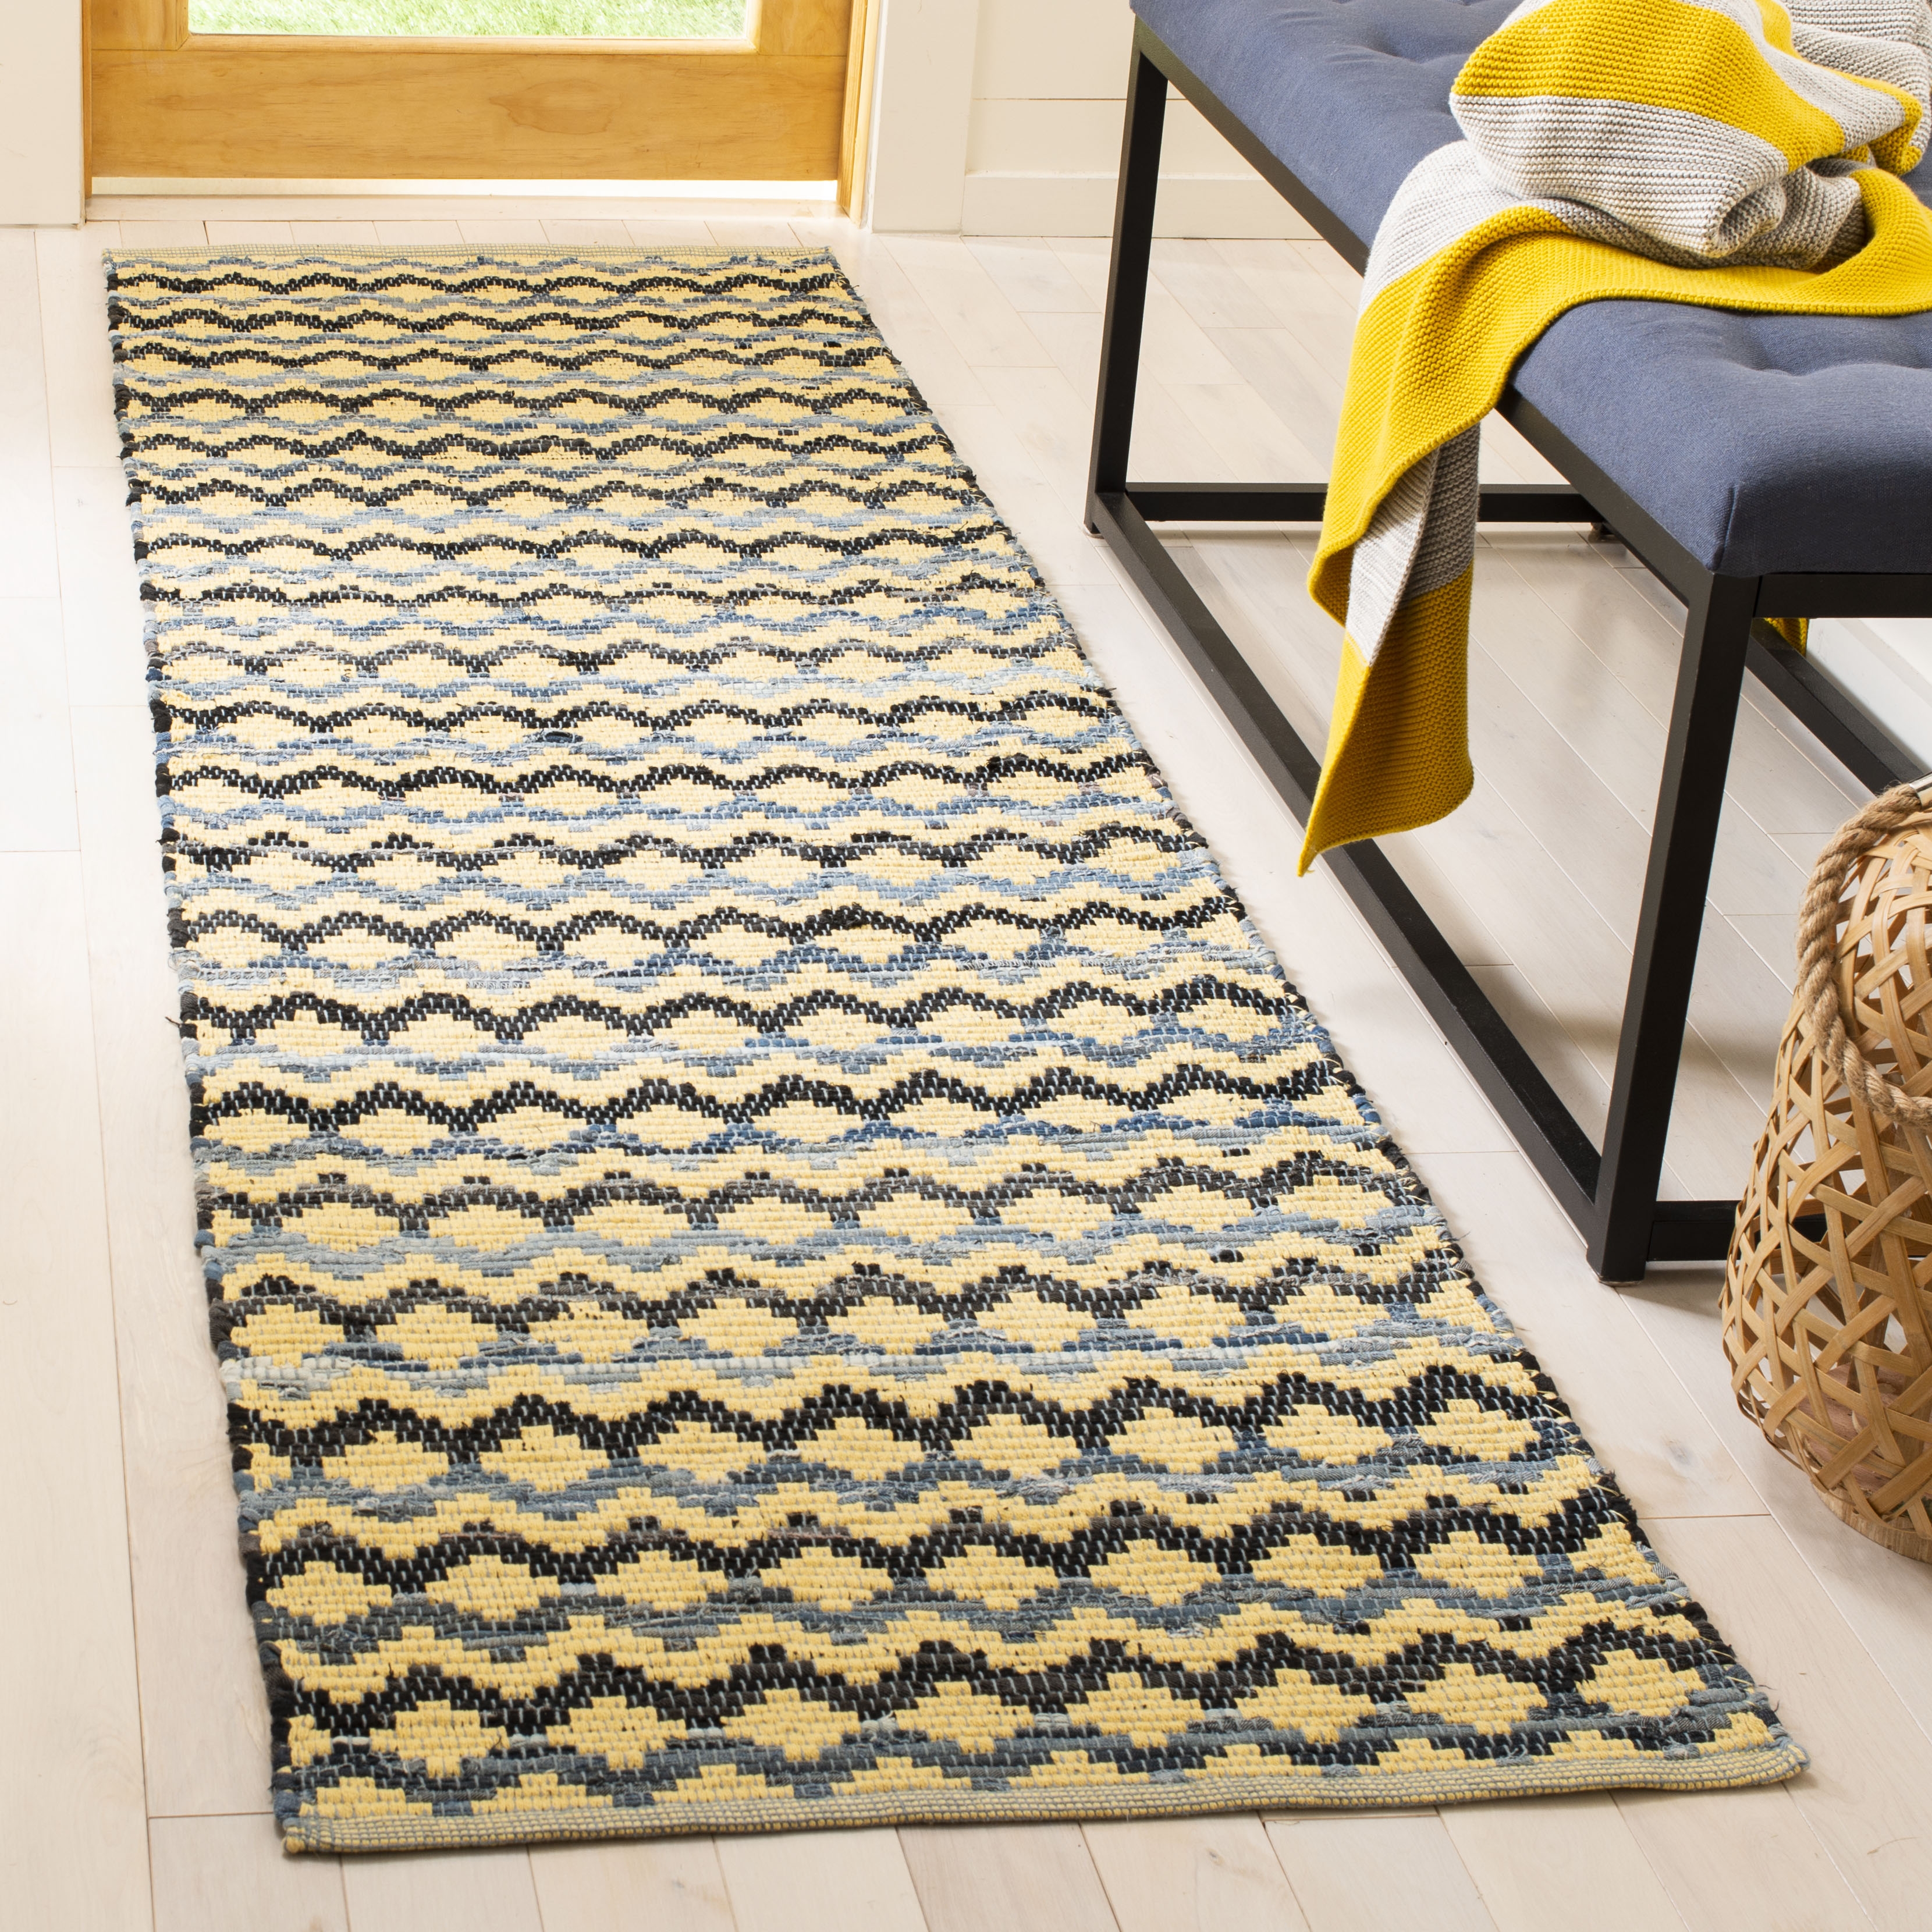 Arlo Home Hand Woven Area Rug, MTK120D, Gold/Blue/Black,  2' 3" X 6' - Image 1